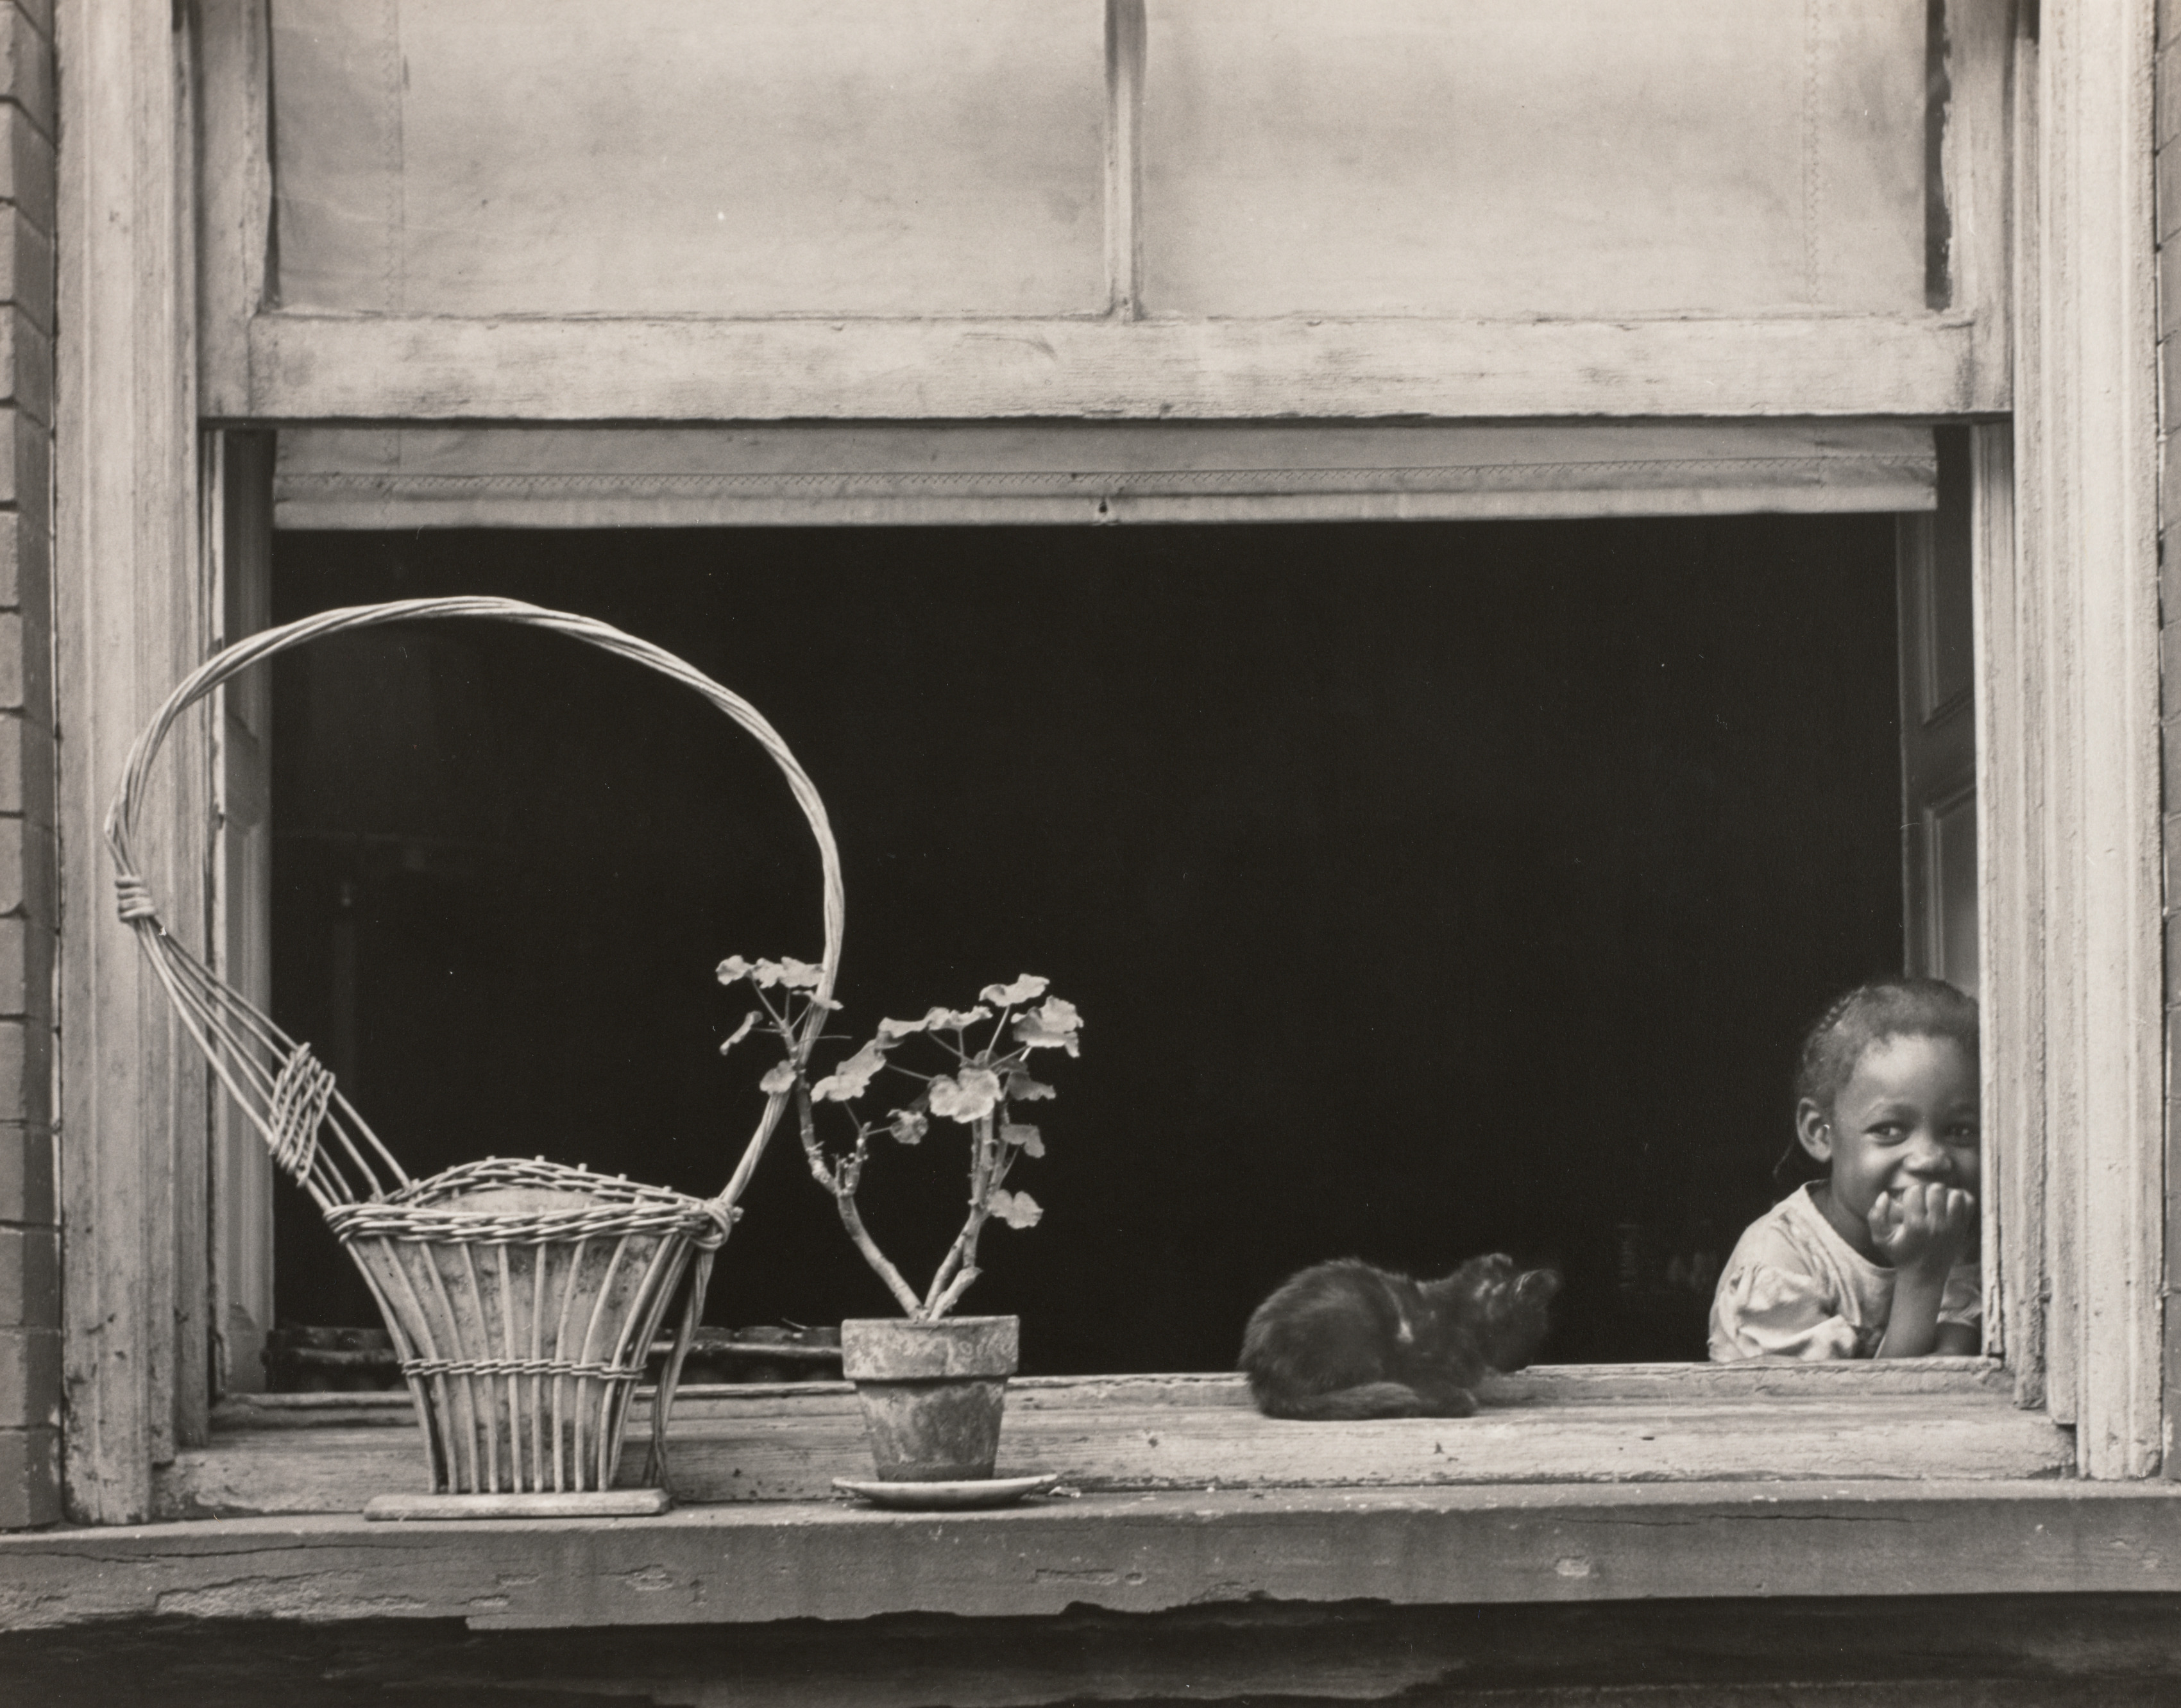 Little Girl in Window with Basket and Plant, East Harlem, New York